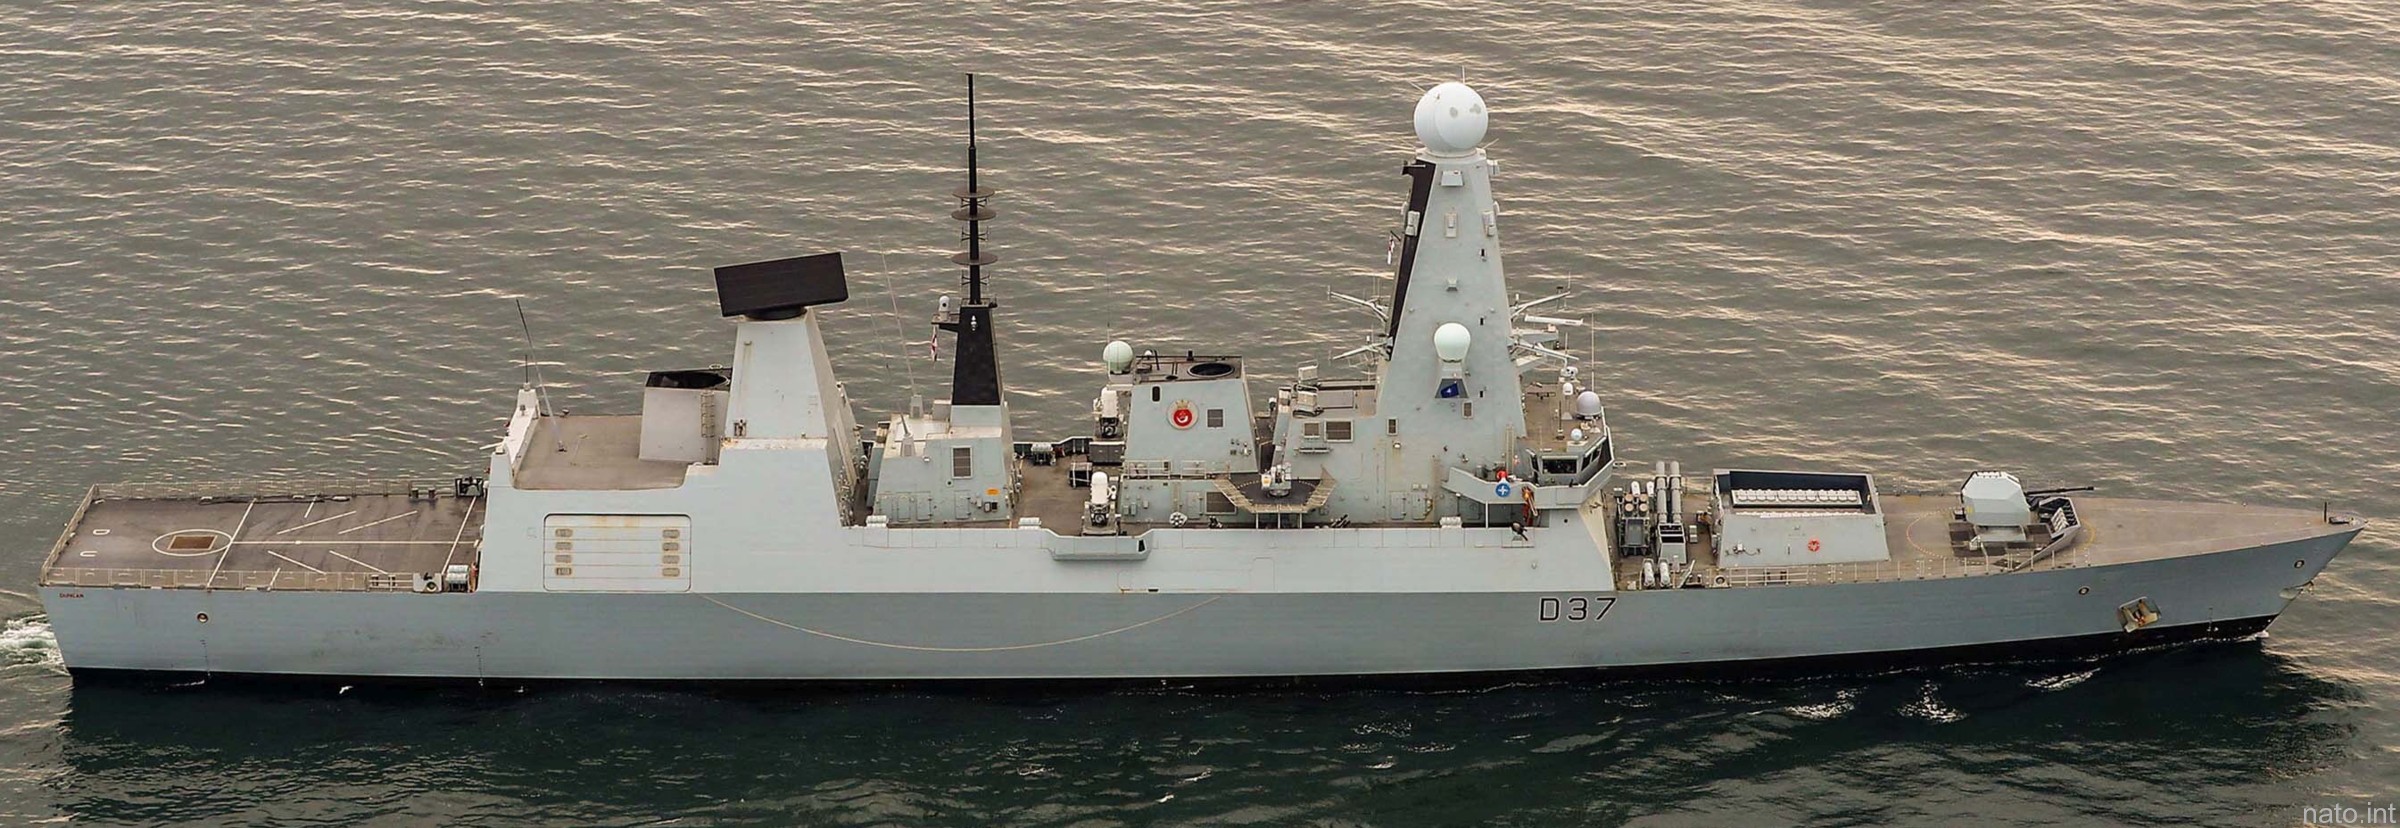 d37 hms duncan d-37 type 45 daring class guided missile destroyer ddg royal navy sea viper 37